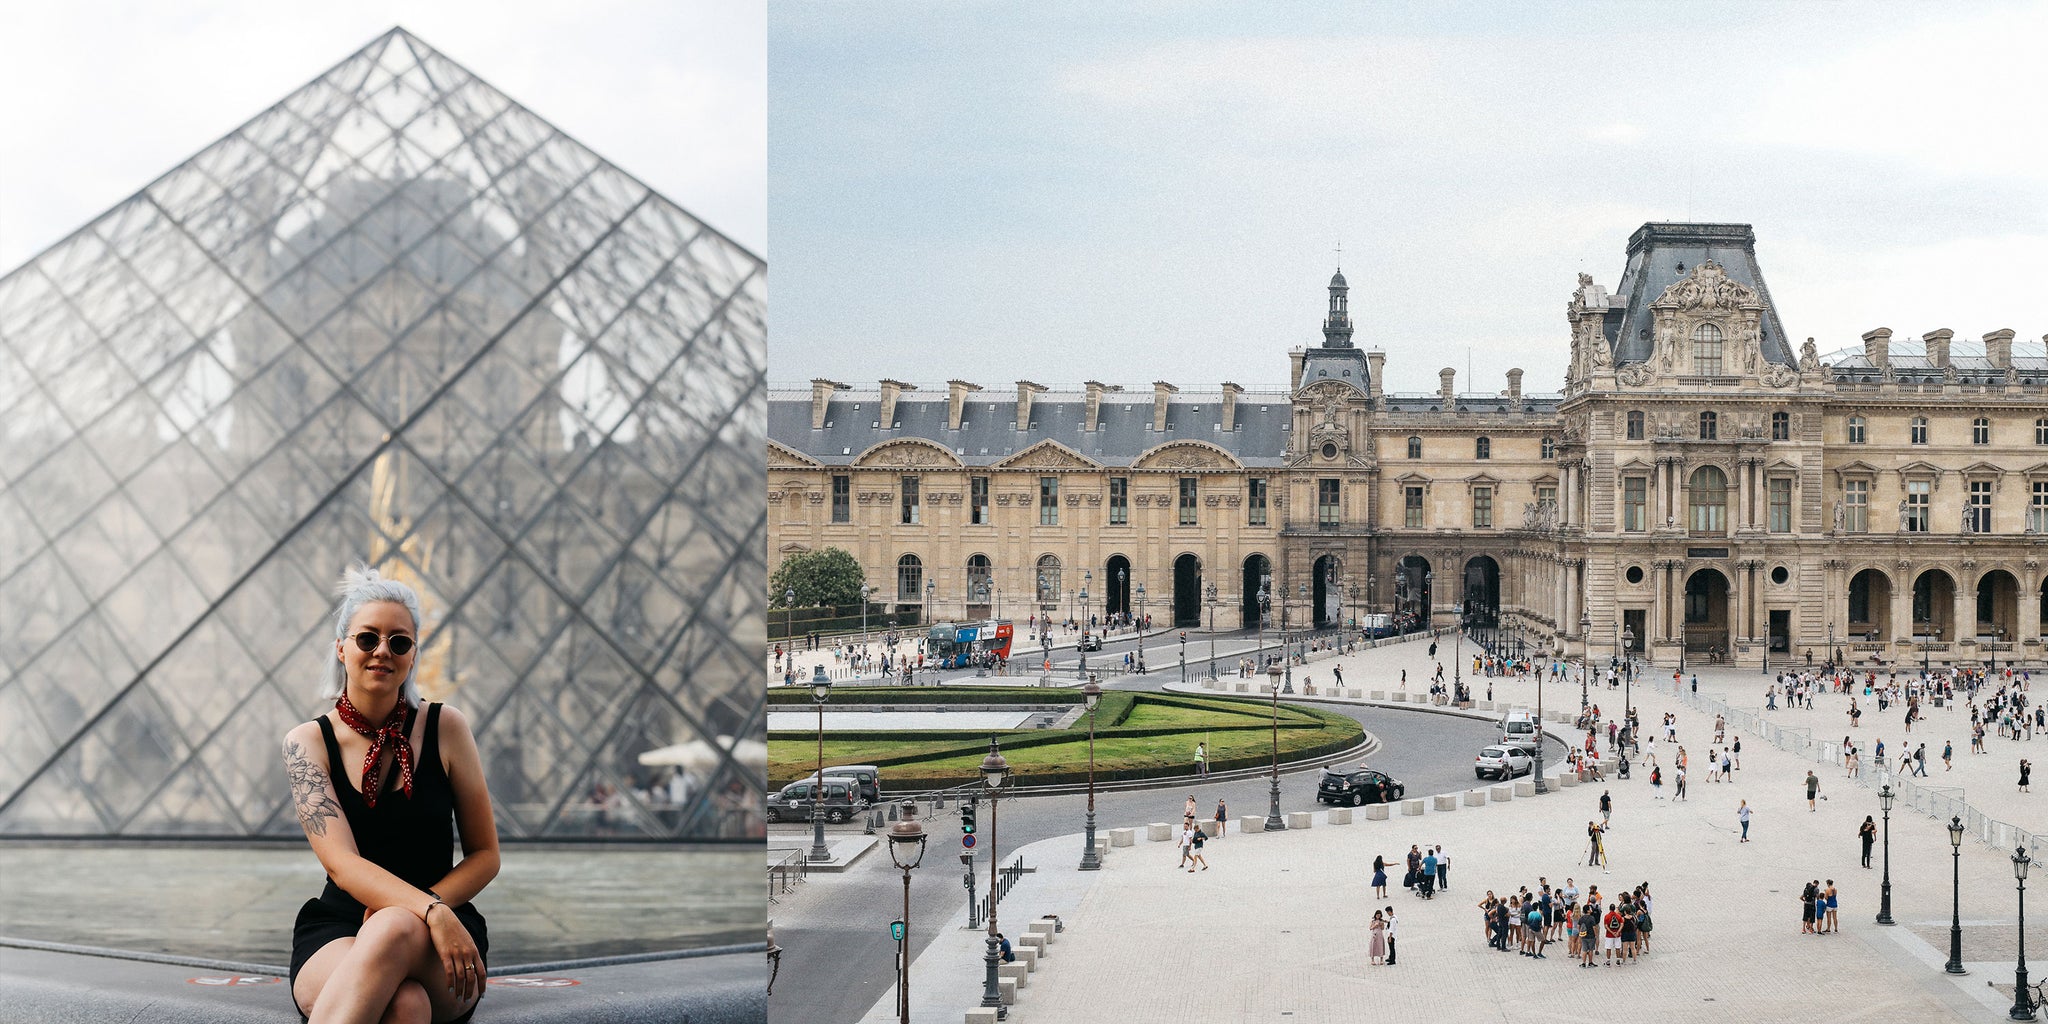 Le Louvre in Paris by Nicole Breanne for Bather